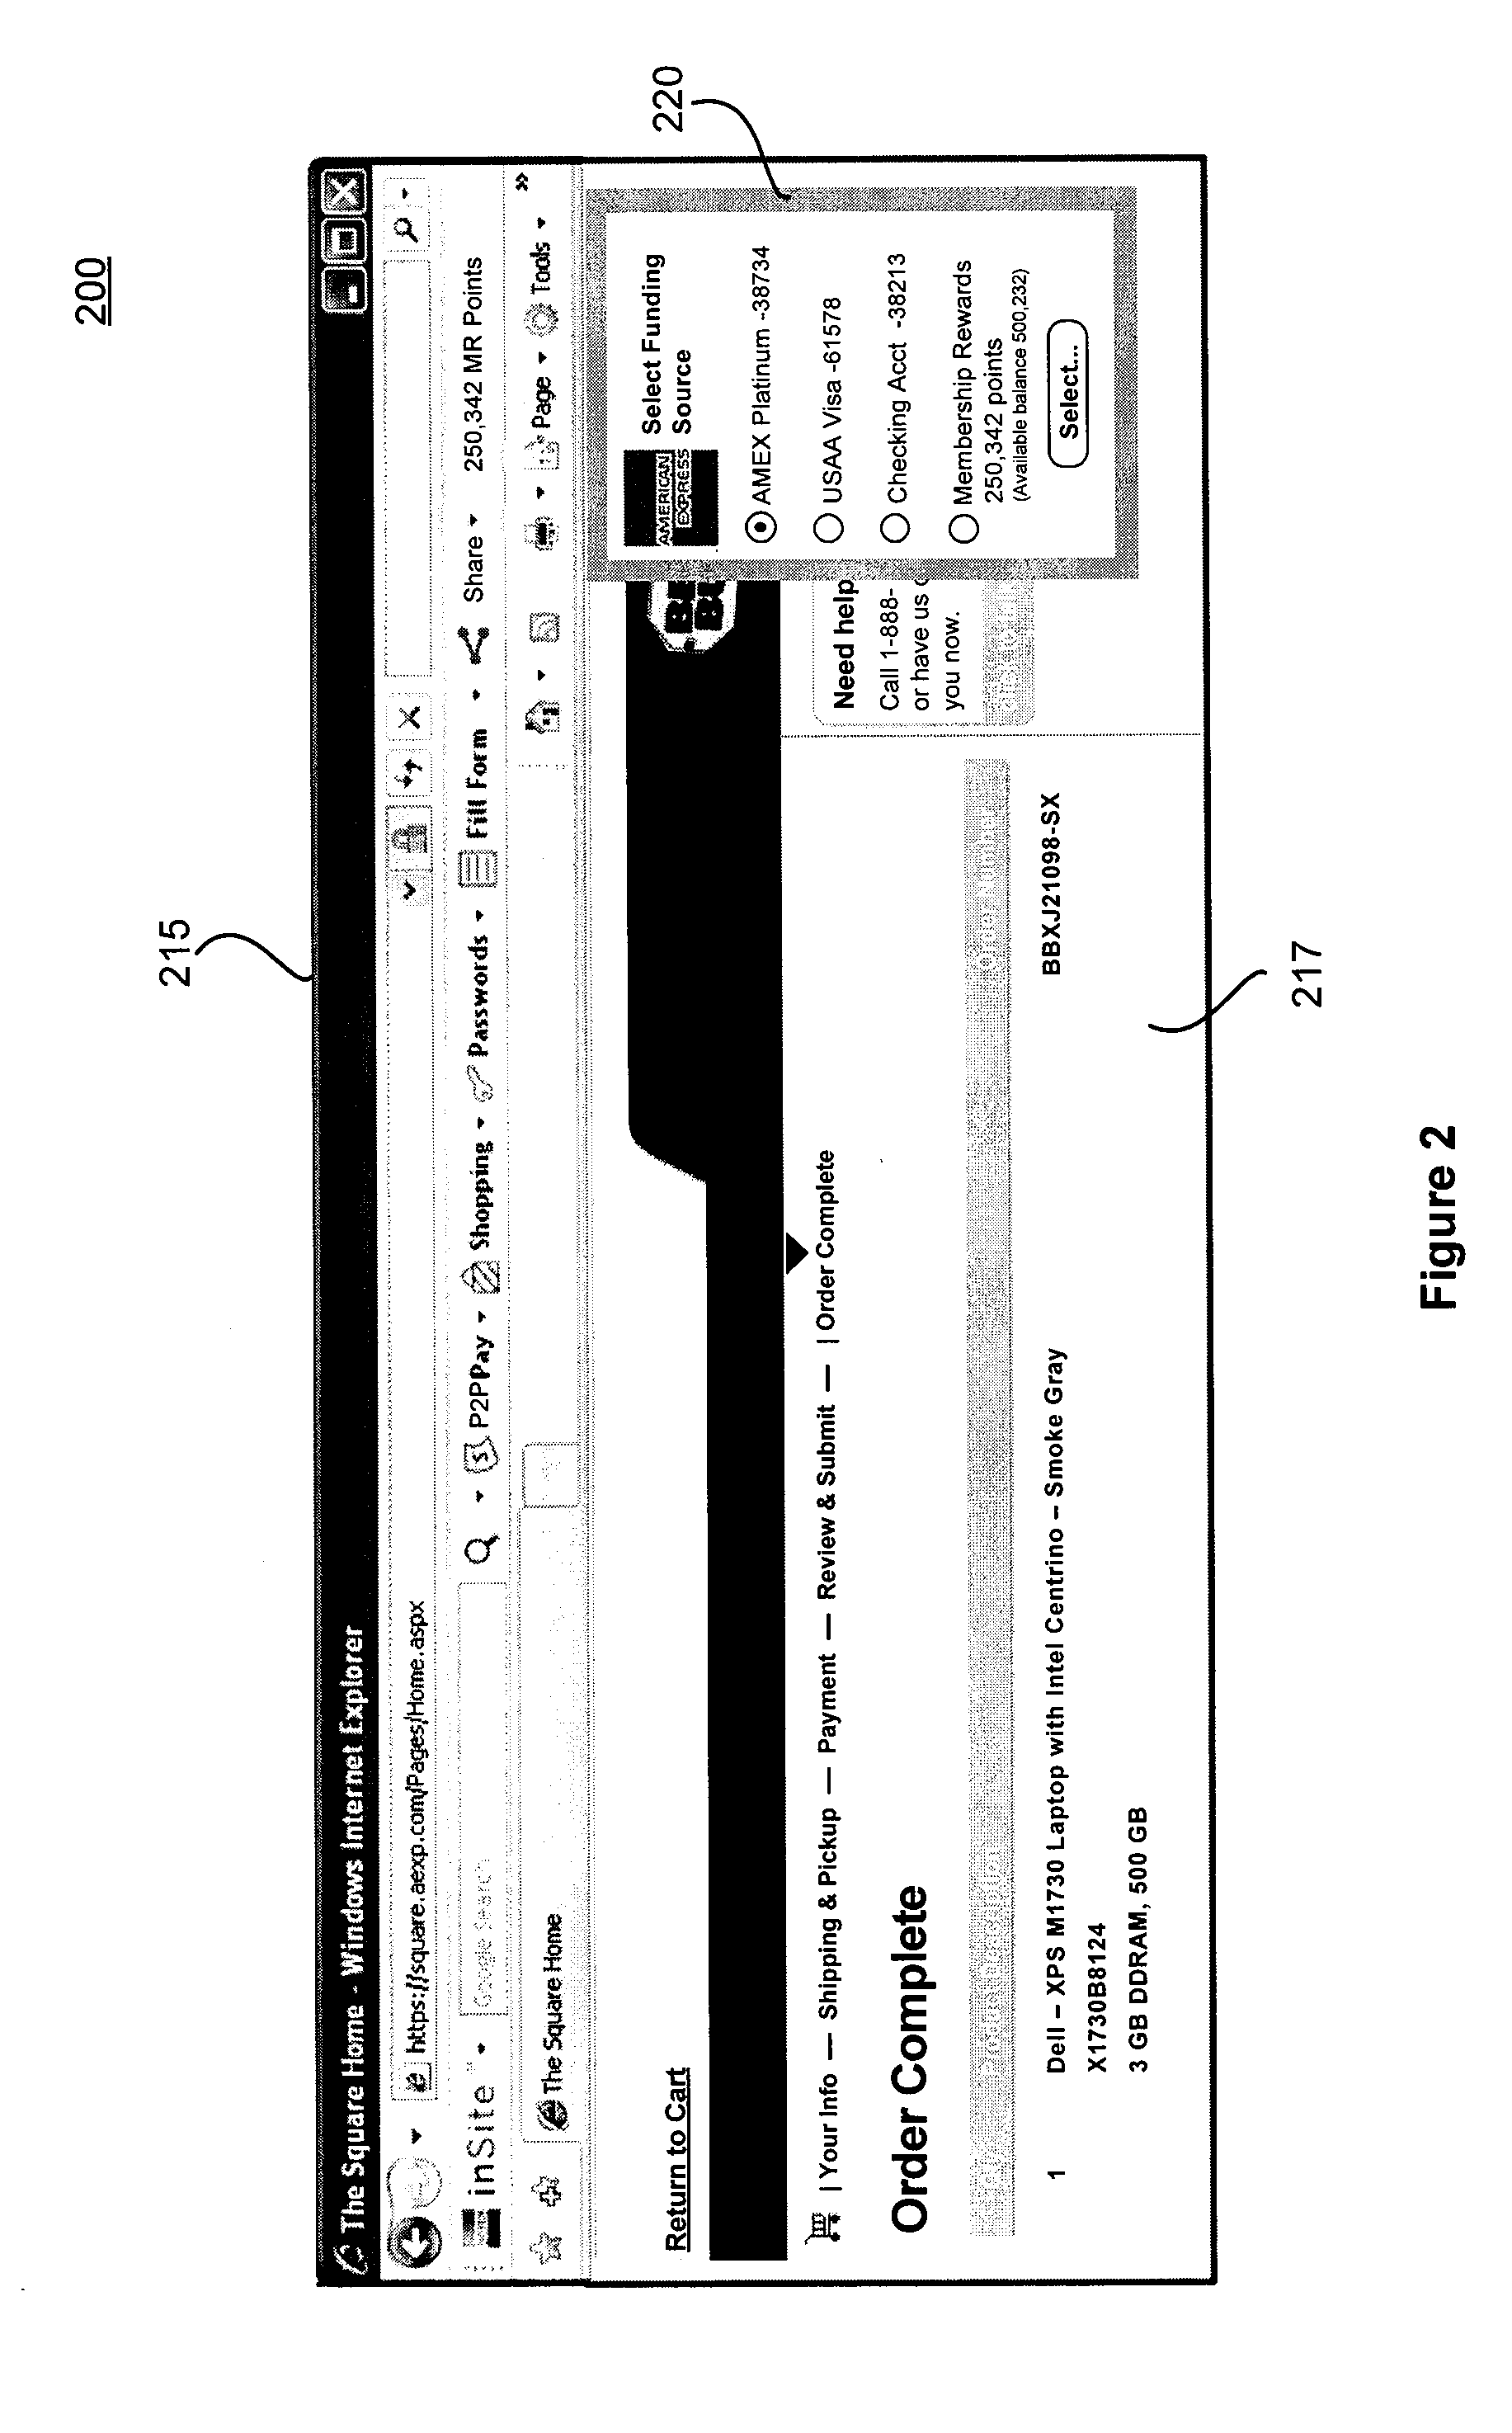 System and Method for Satisfying a Transaction Amount from an Alternative Funding Source